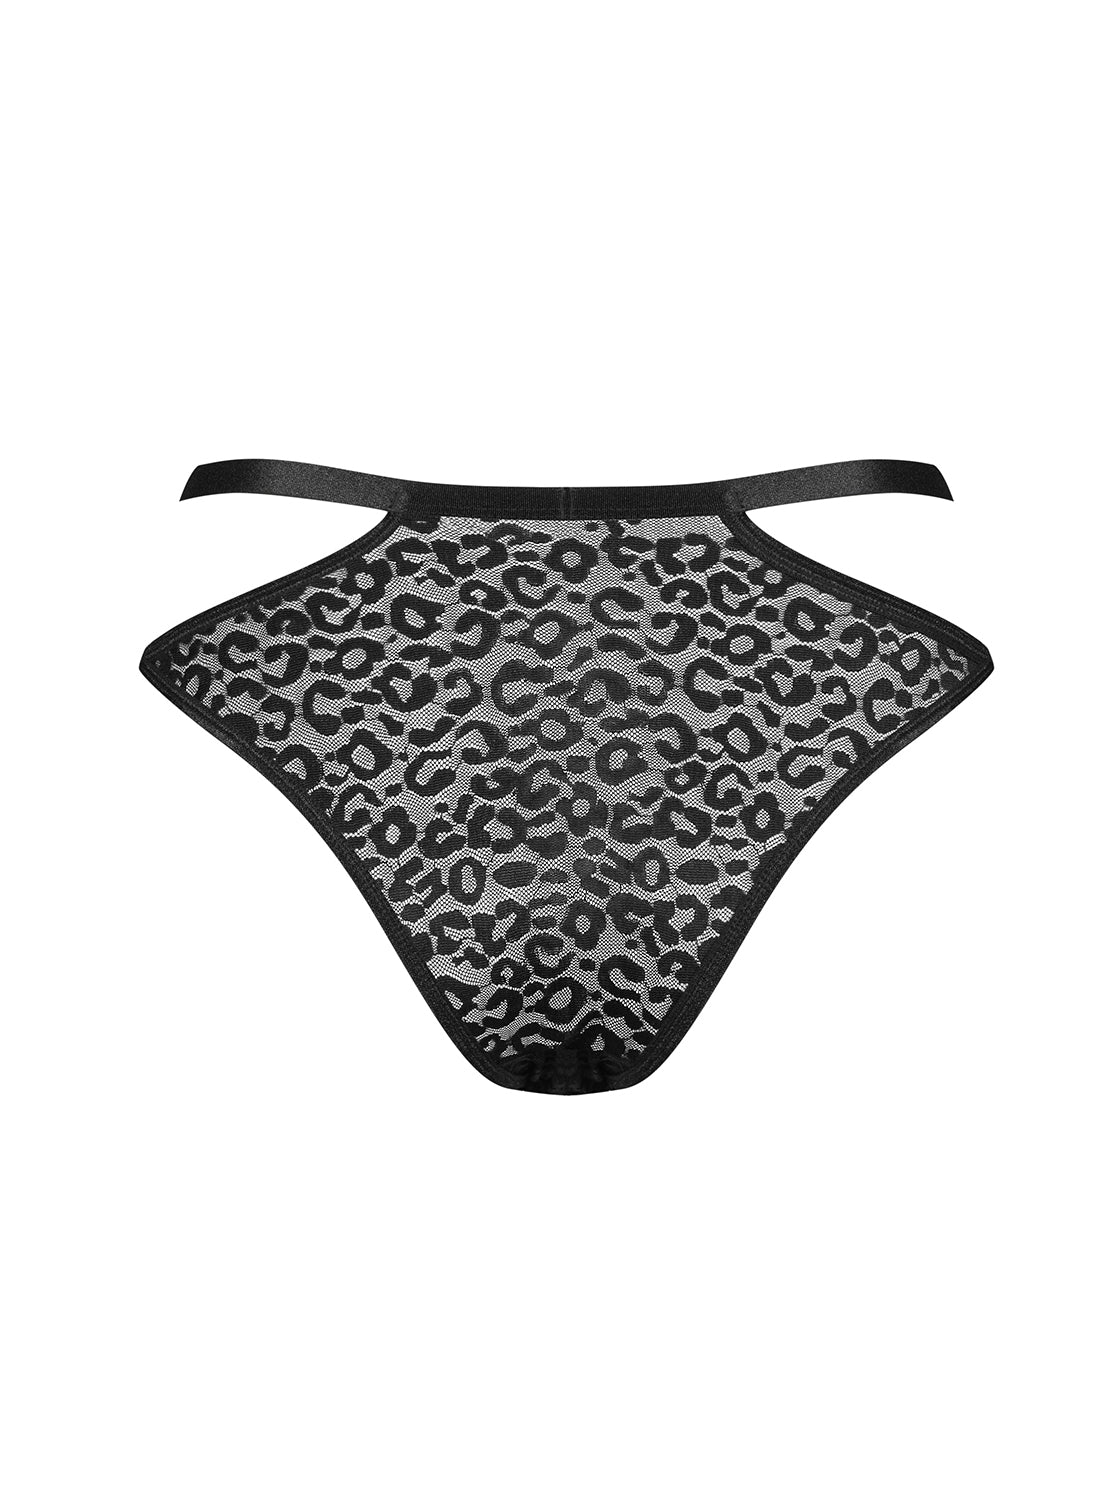 Bagirela a feminine panty made of translucent material with animal print pattern